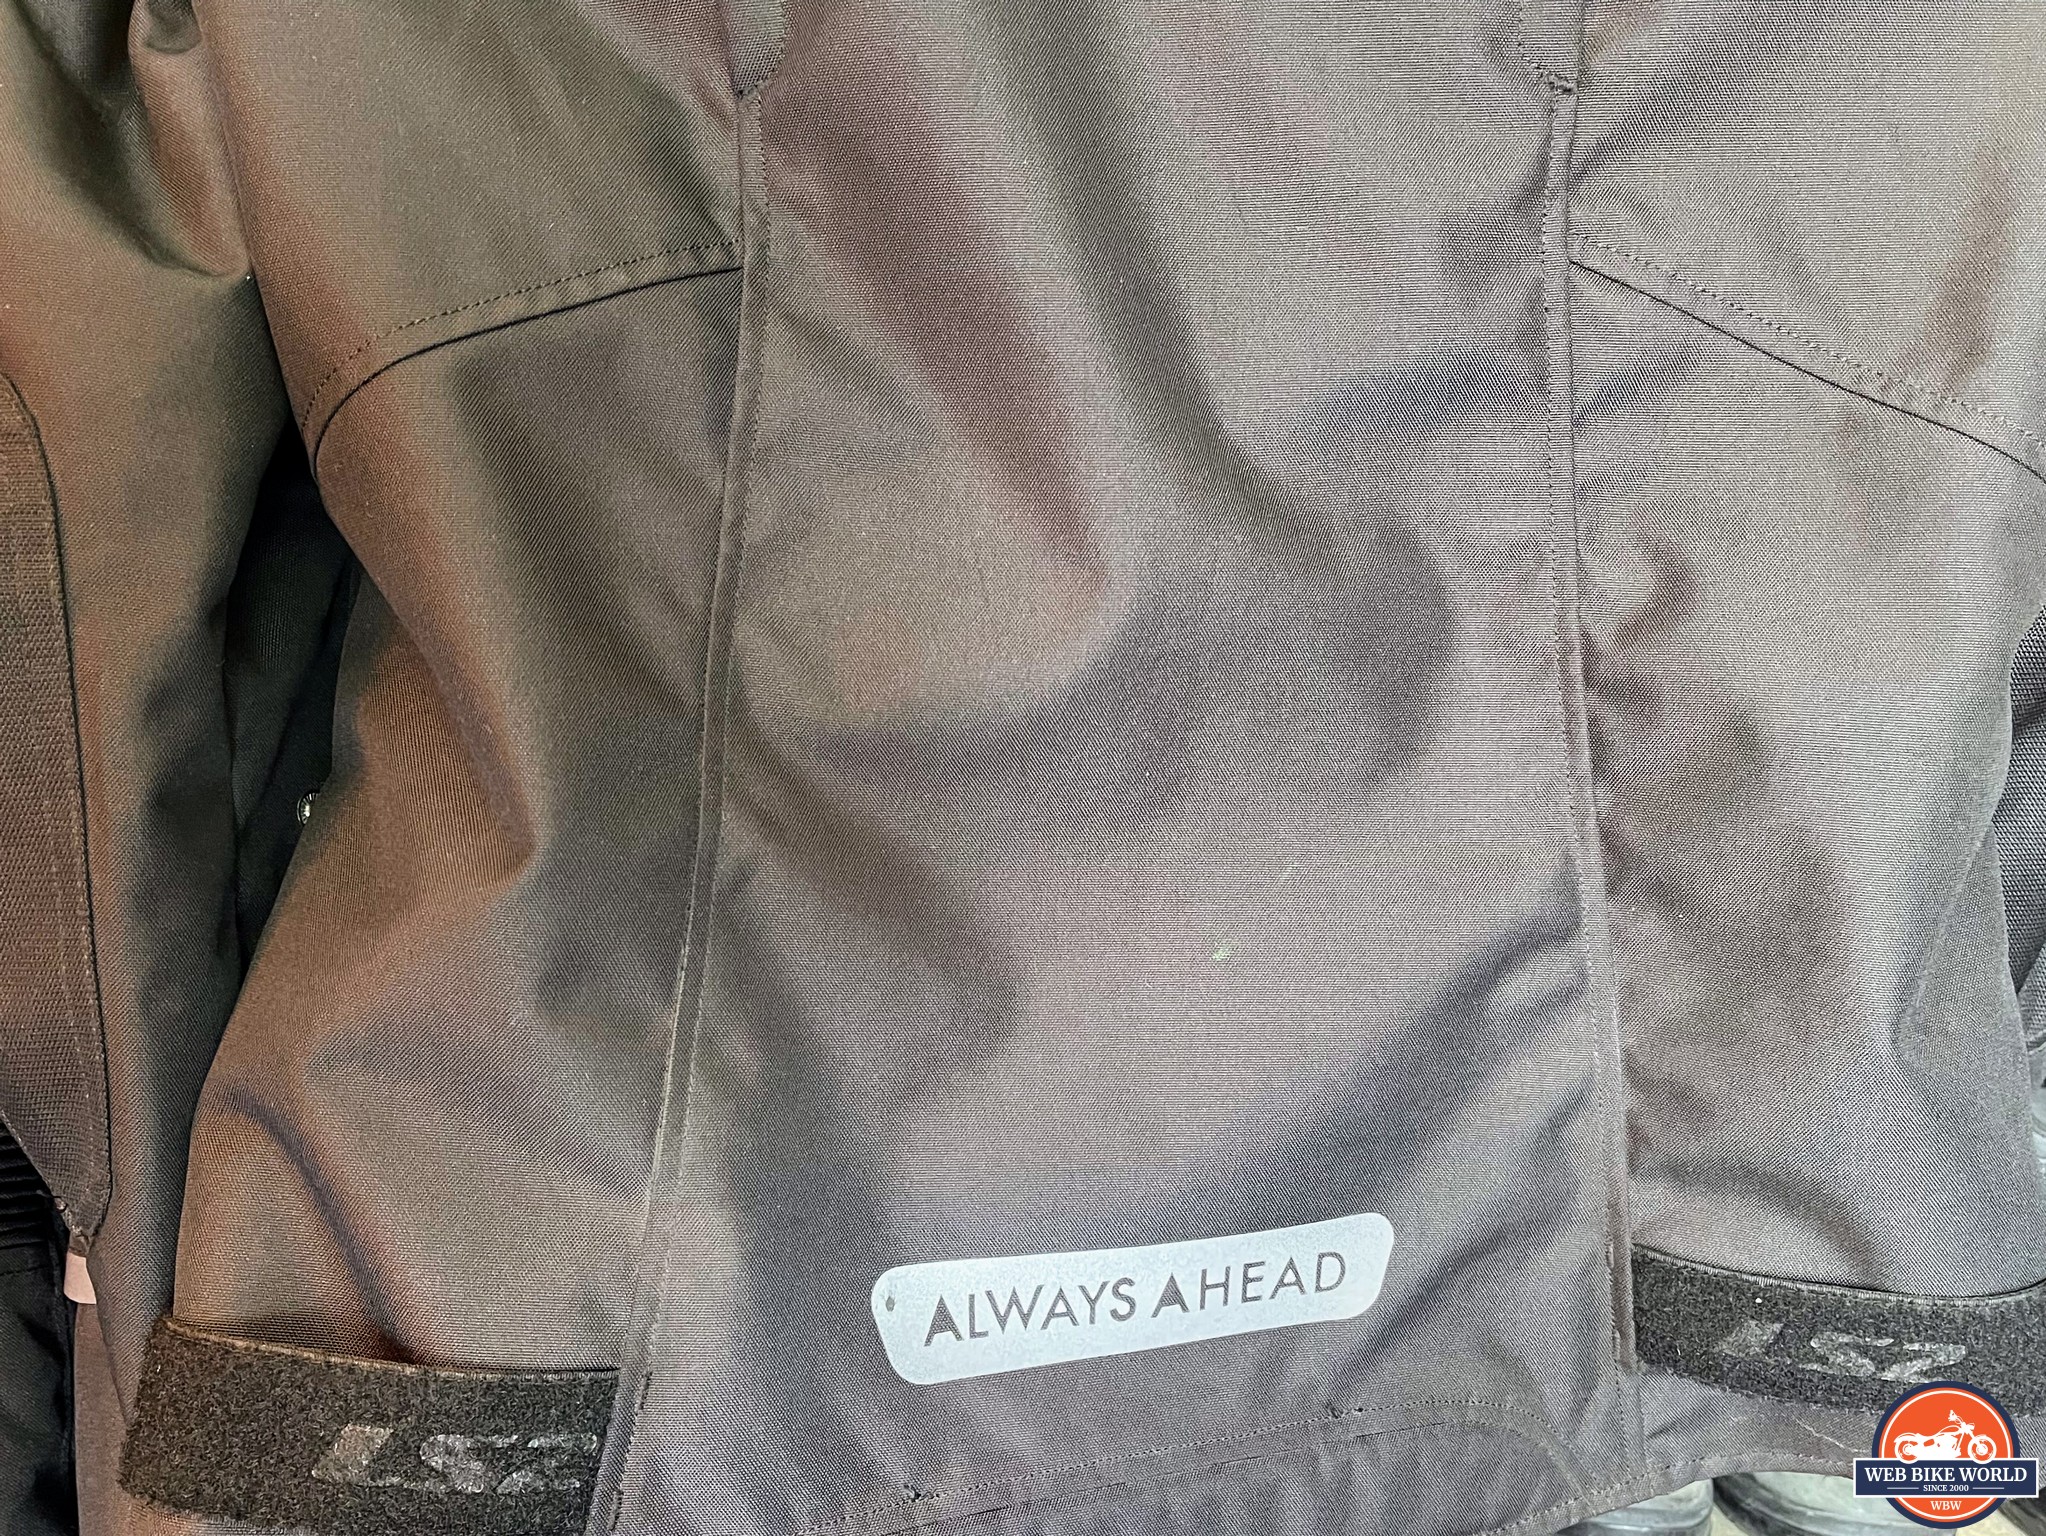 Velcro straps and reflective branding on the lower back of the jacket